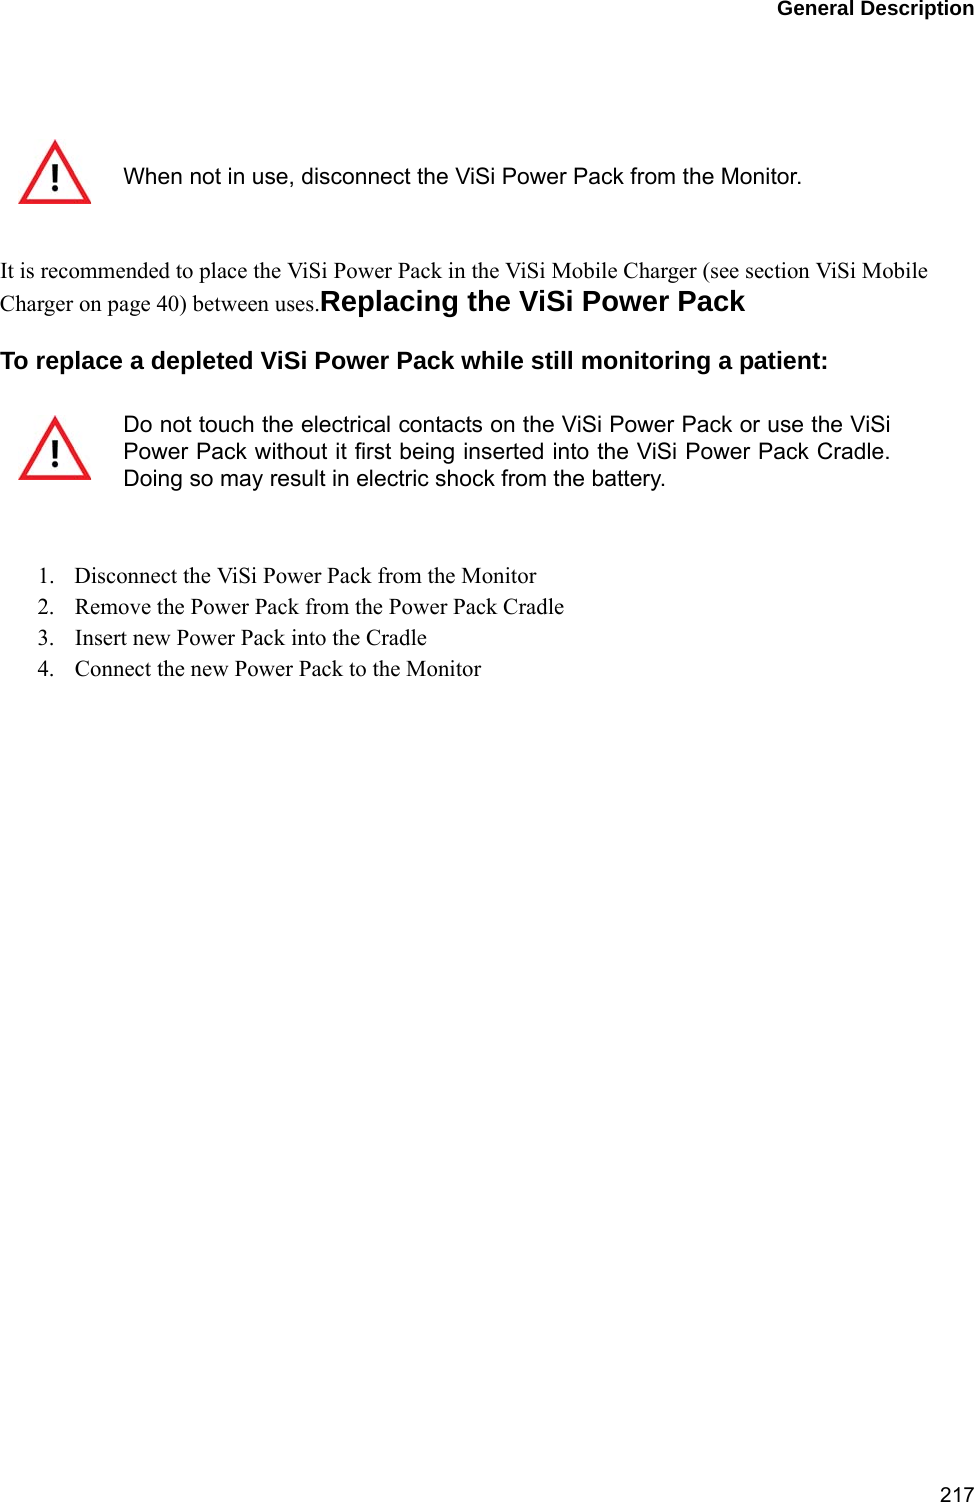 General Description217 It is recommended to place the ViSi Power Pack in the ViSi Mobile Charger (see section ViSi Mobile Charger on page 40) between uses.Replacing the ViSi Power PackTo replace a depleted ViSi Power Pack while still monitoring a patient:1. Disconnect the ViSi Power Pack from the Monitor2. Remove the Power Pack from the Power Pack Cradle3. Insert new Power Pack into the Cradle4. Connect the new Power Pack to the MonitorWhen not in use, disconnect the ViSi Power Pack from the Monitor.Do not touch the electrical contacts on the ViSi Power Pack or use the ViSiPower Pack without it first being inserted into the ViSi Power Pack Cradle.Doing so may result in electric shock from the battery.